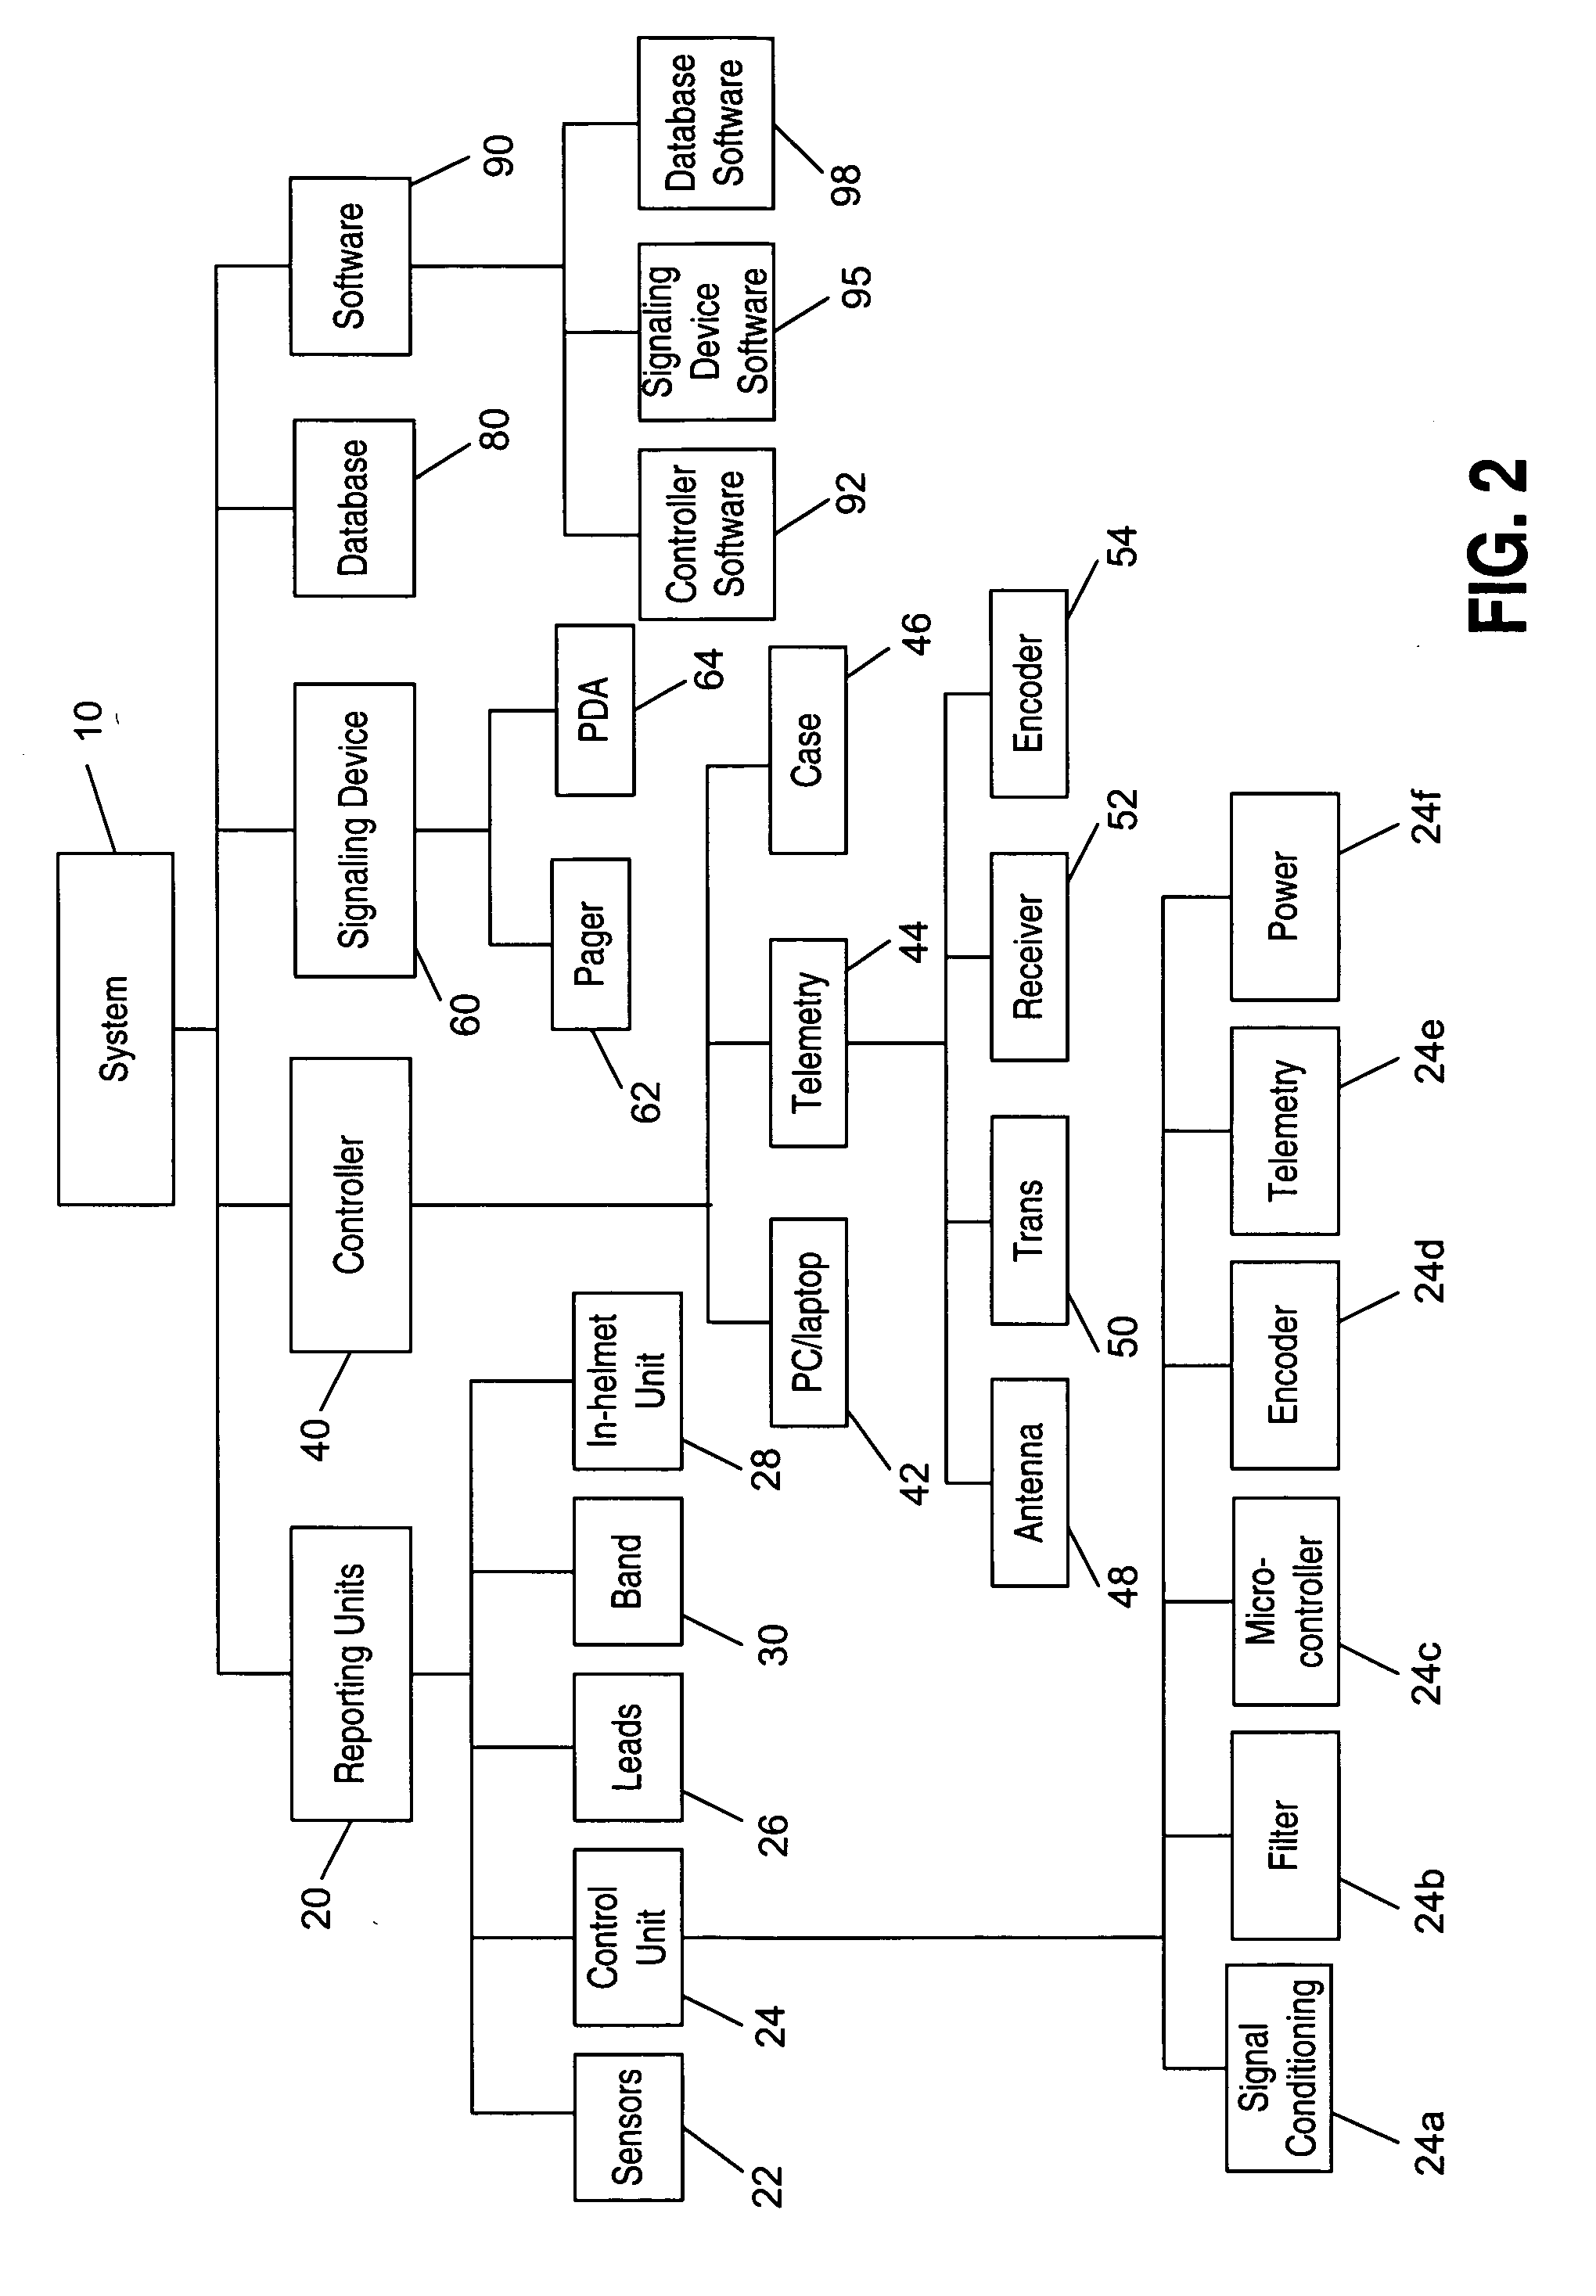 System and method for evaluating and providing treatment to sports participants